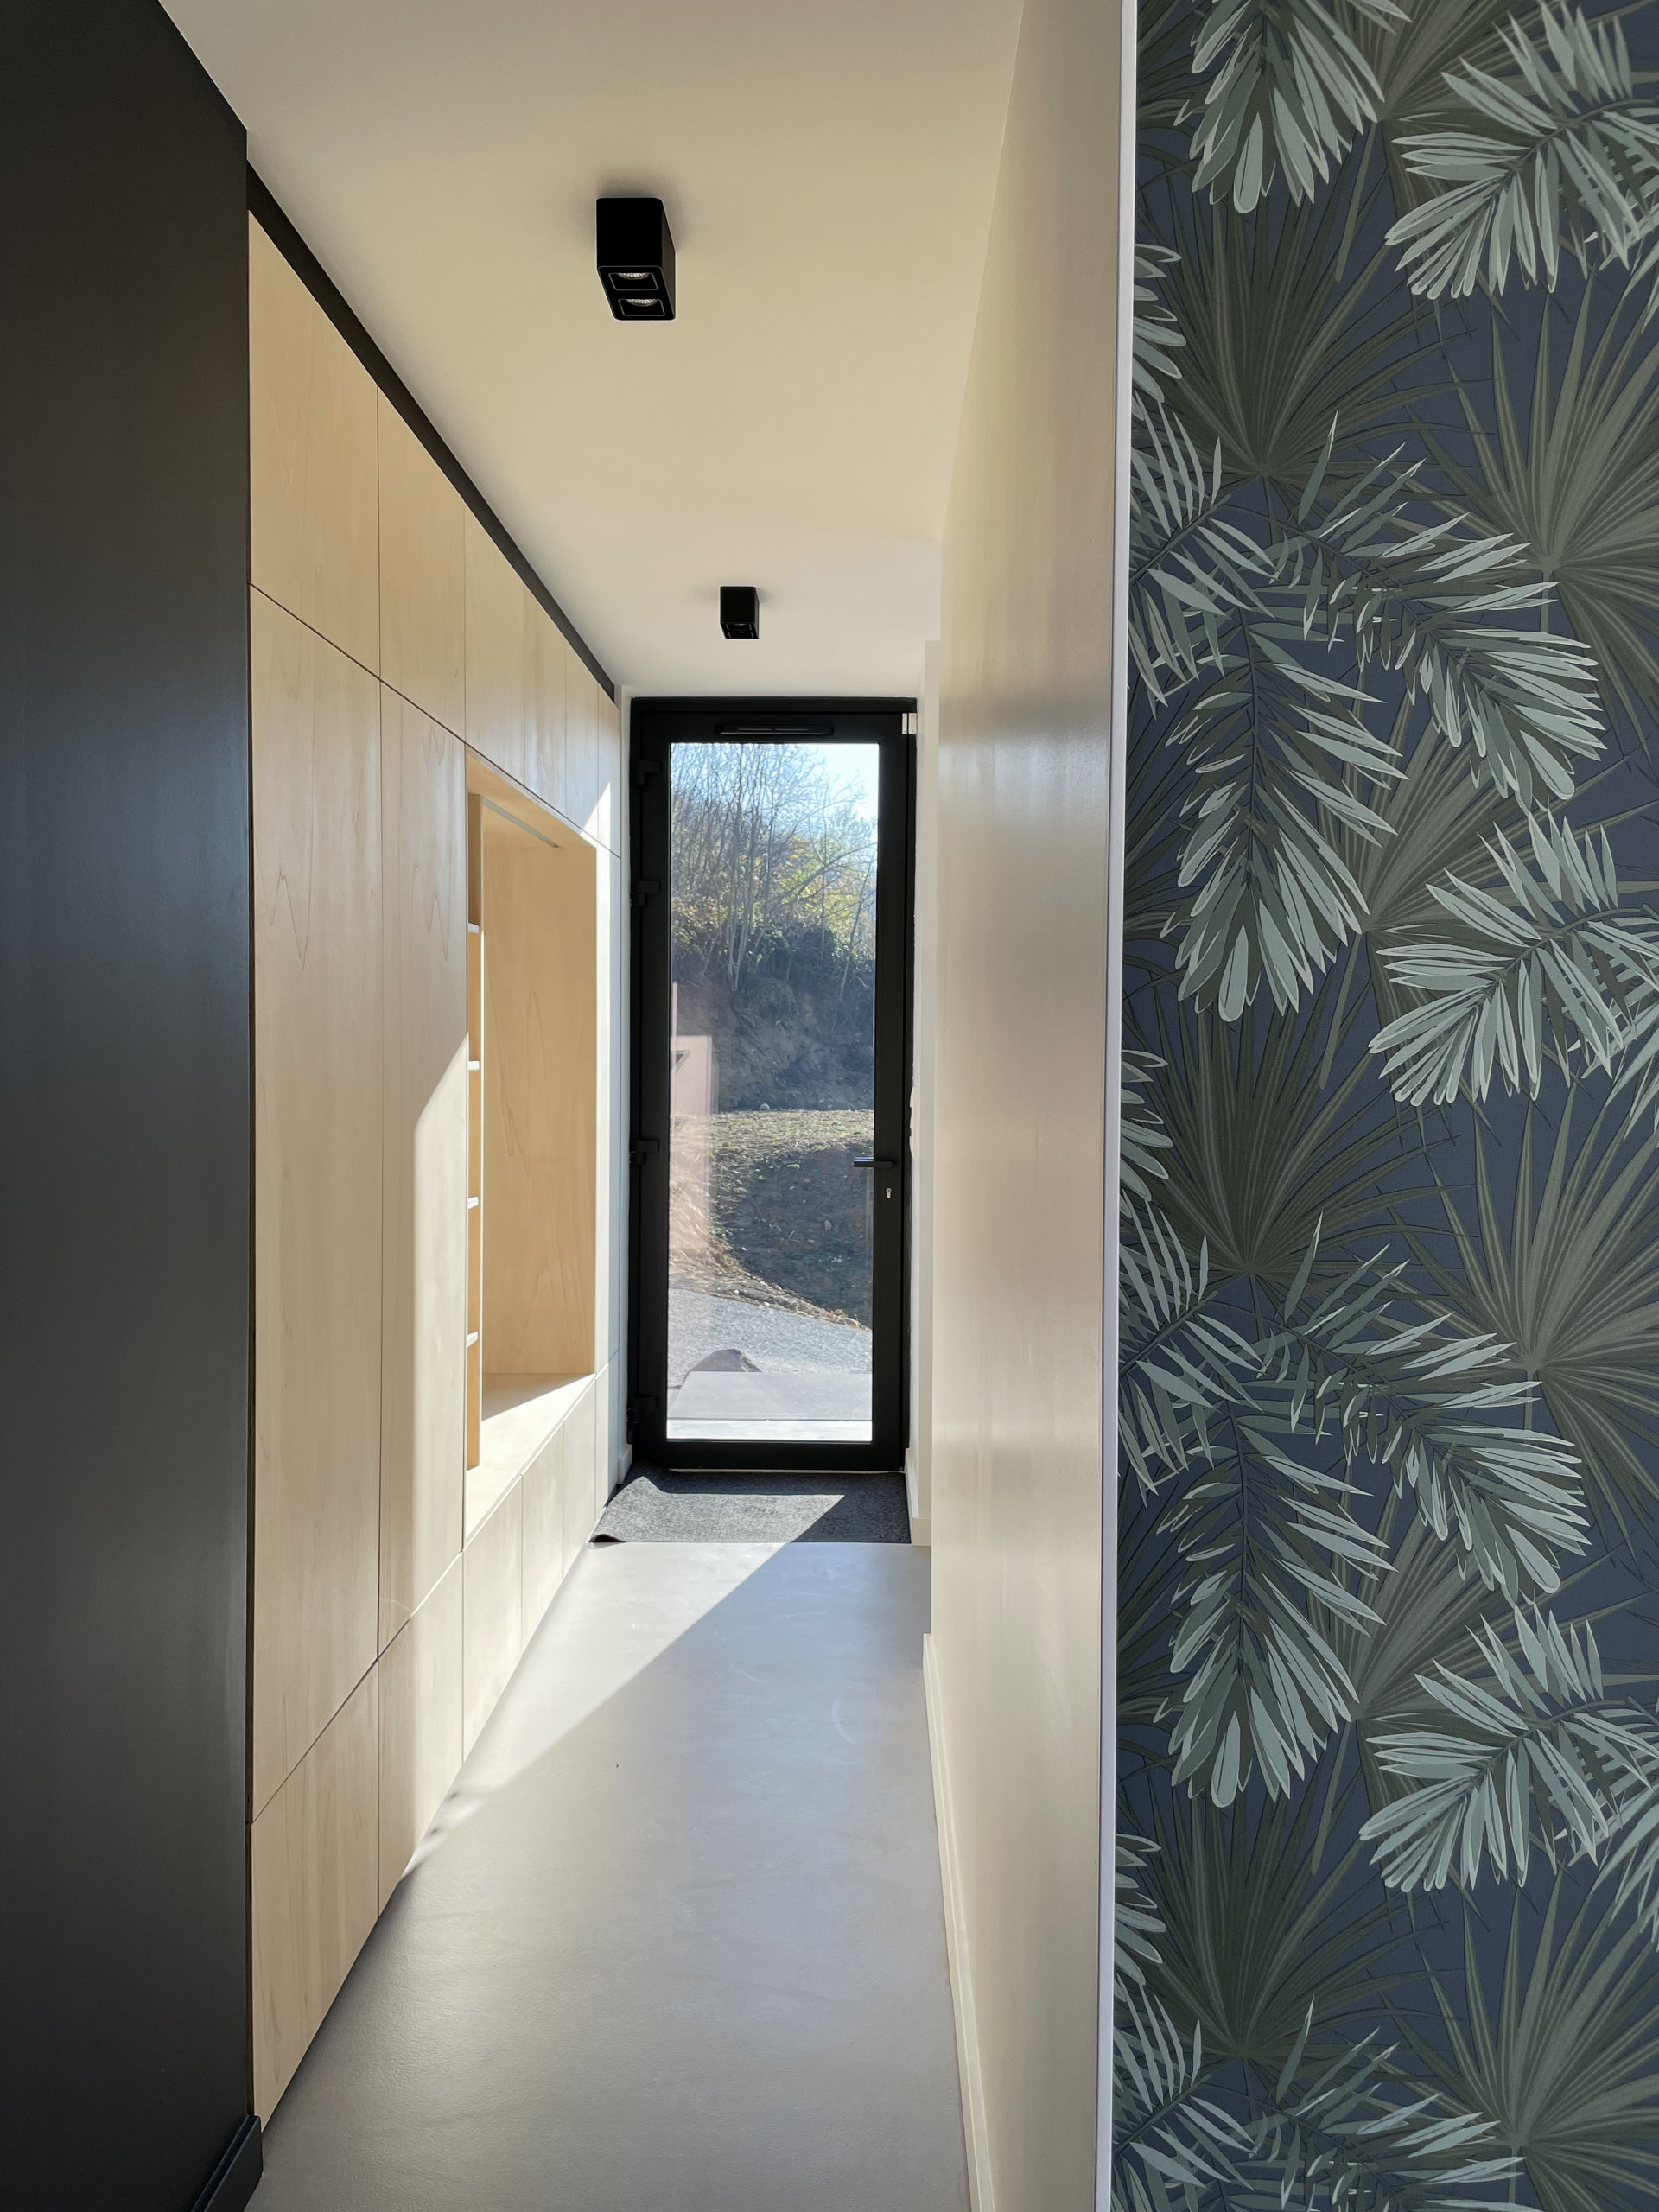 75 Beautiful Concrete Floor And Wallpaper Entryway Pictures Ideas April 21 Houzz